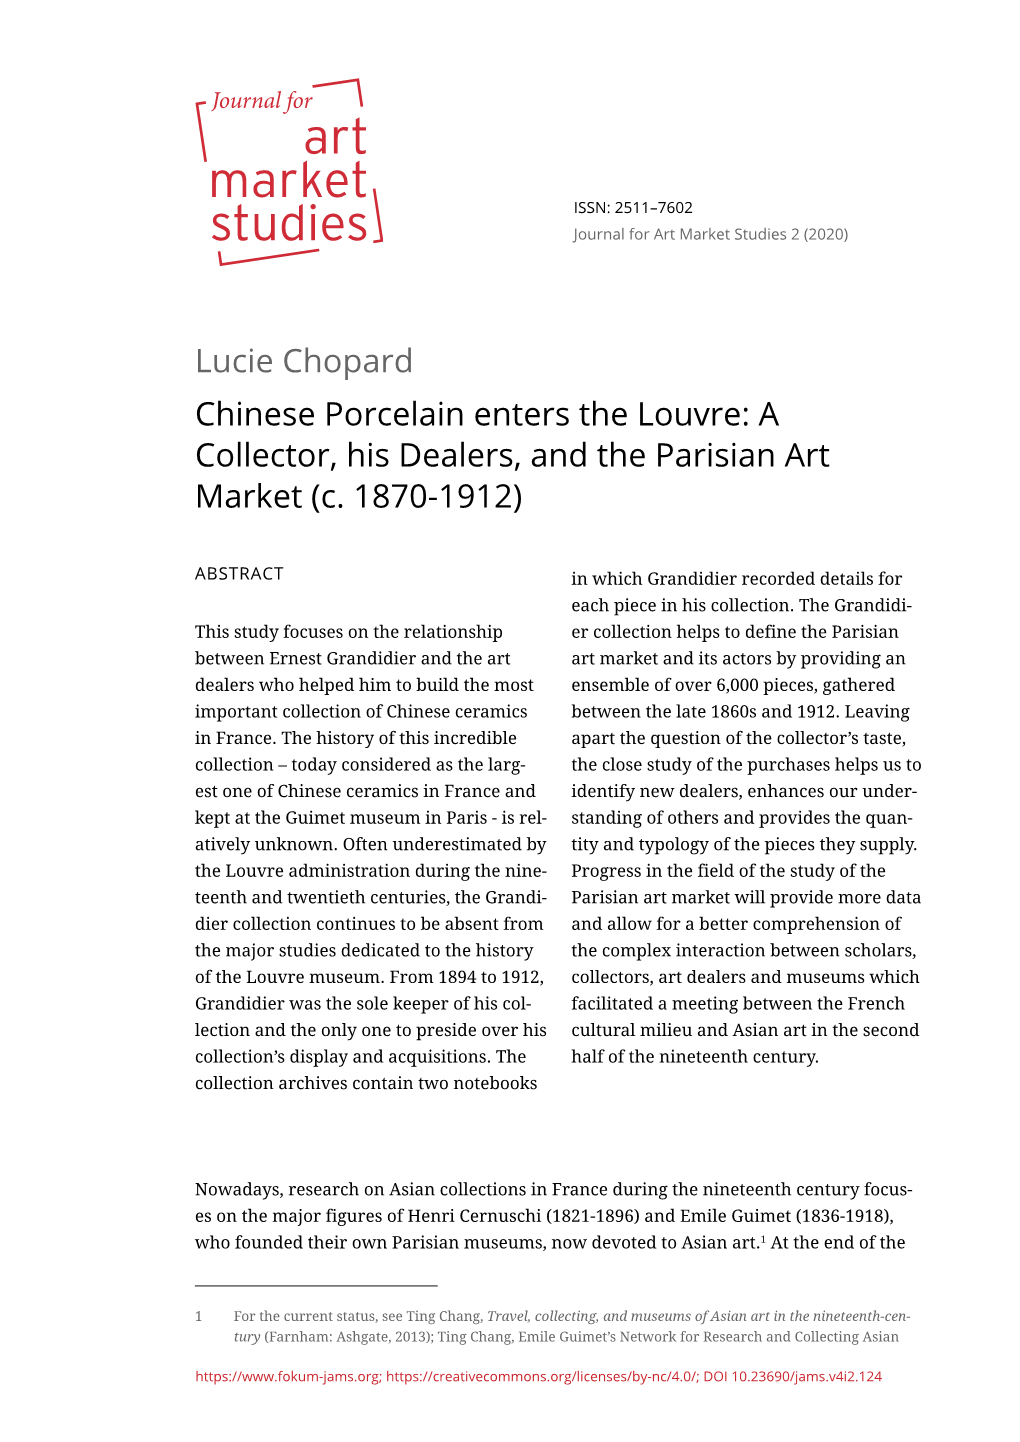 Lucie Chopard Chinese Porcelain Enters the Louvre: a Collector, His Dealers, and the Parisian Art Market (C